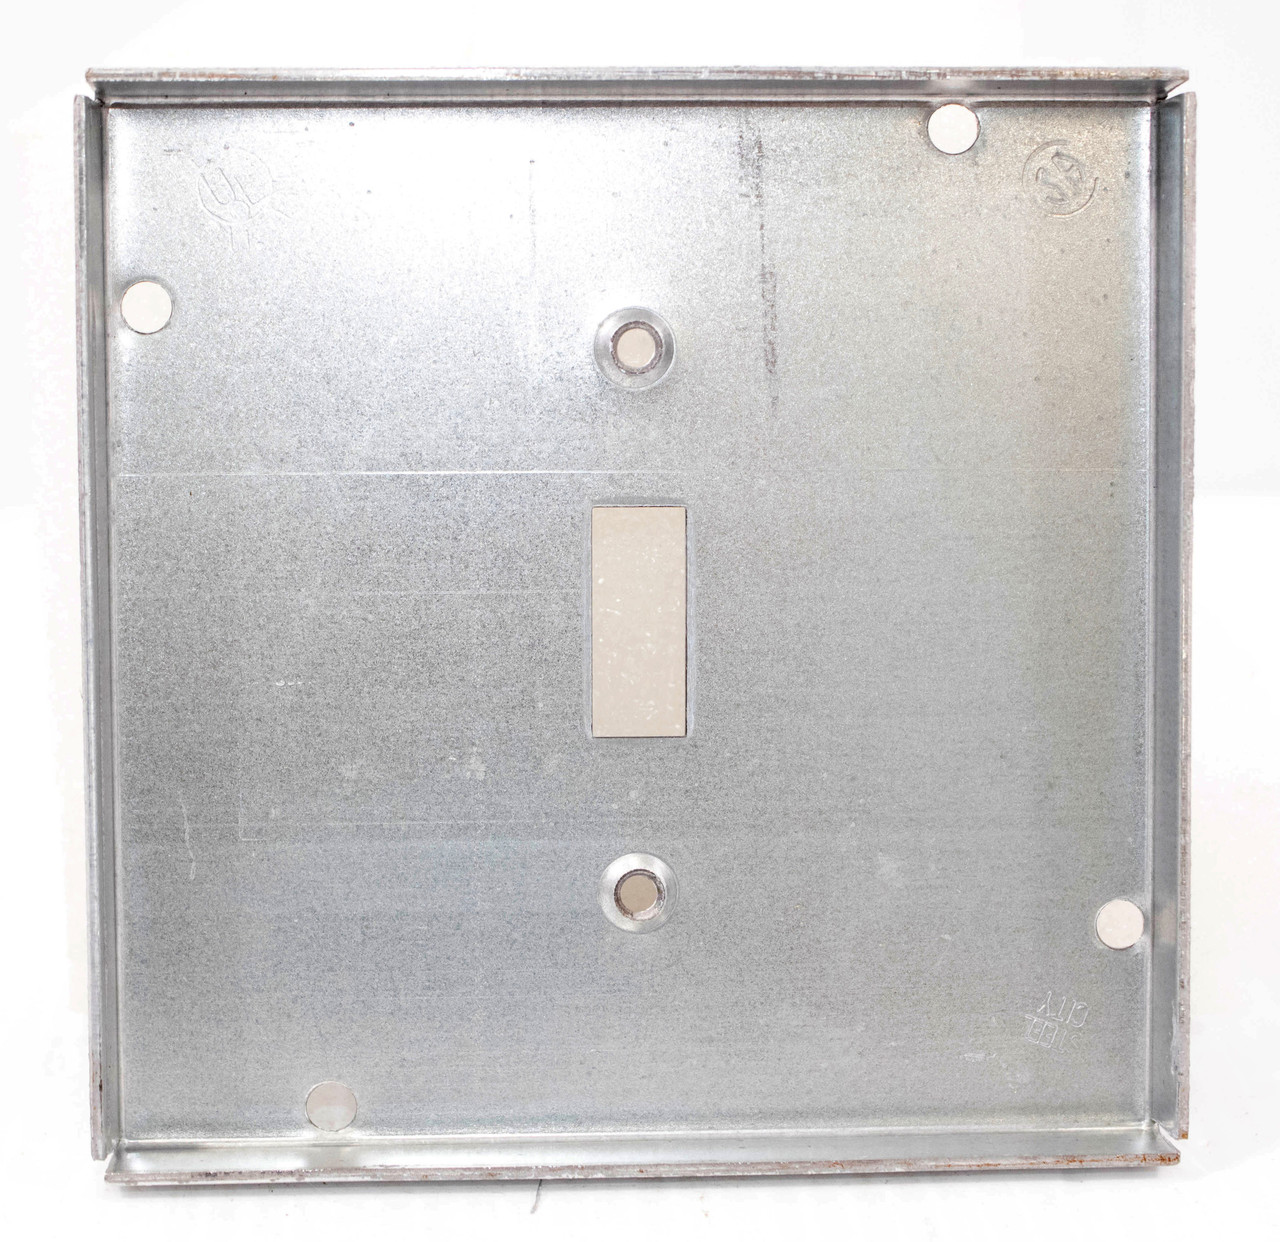 Thomas And Betts RSL-9 Galvanized Steel Cover 4-11/16 Square with Screws